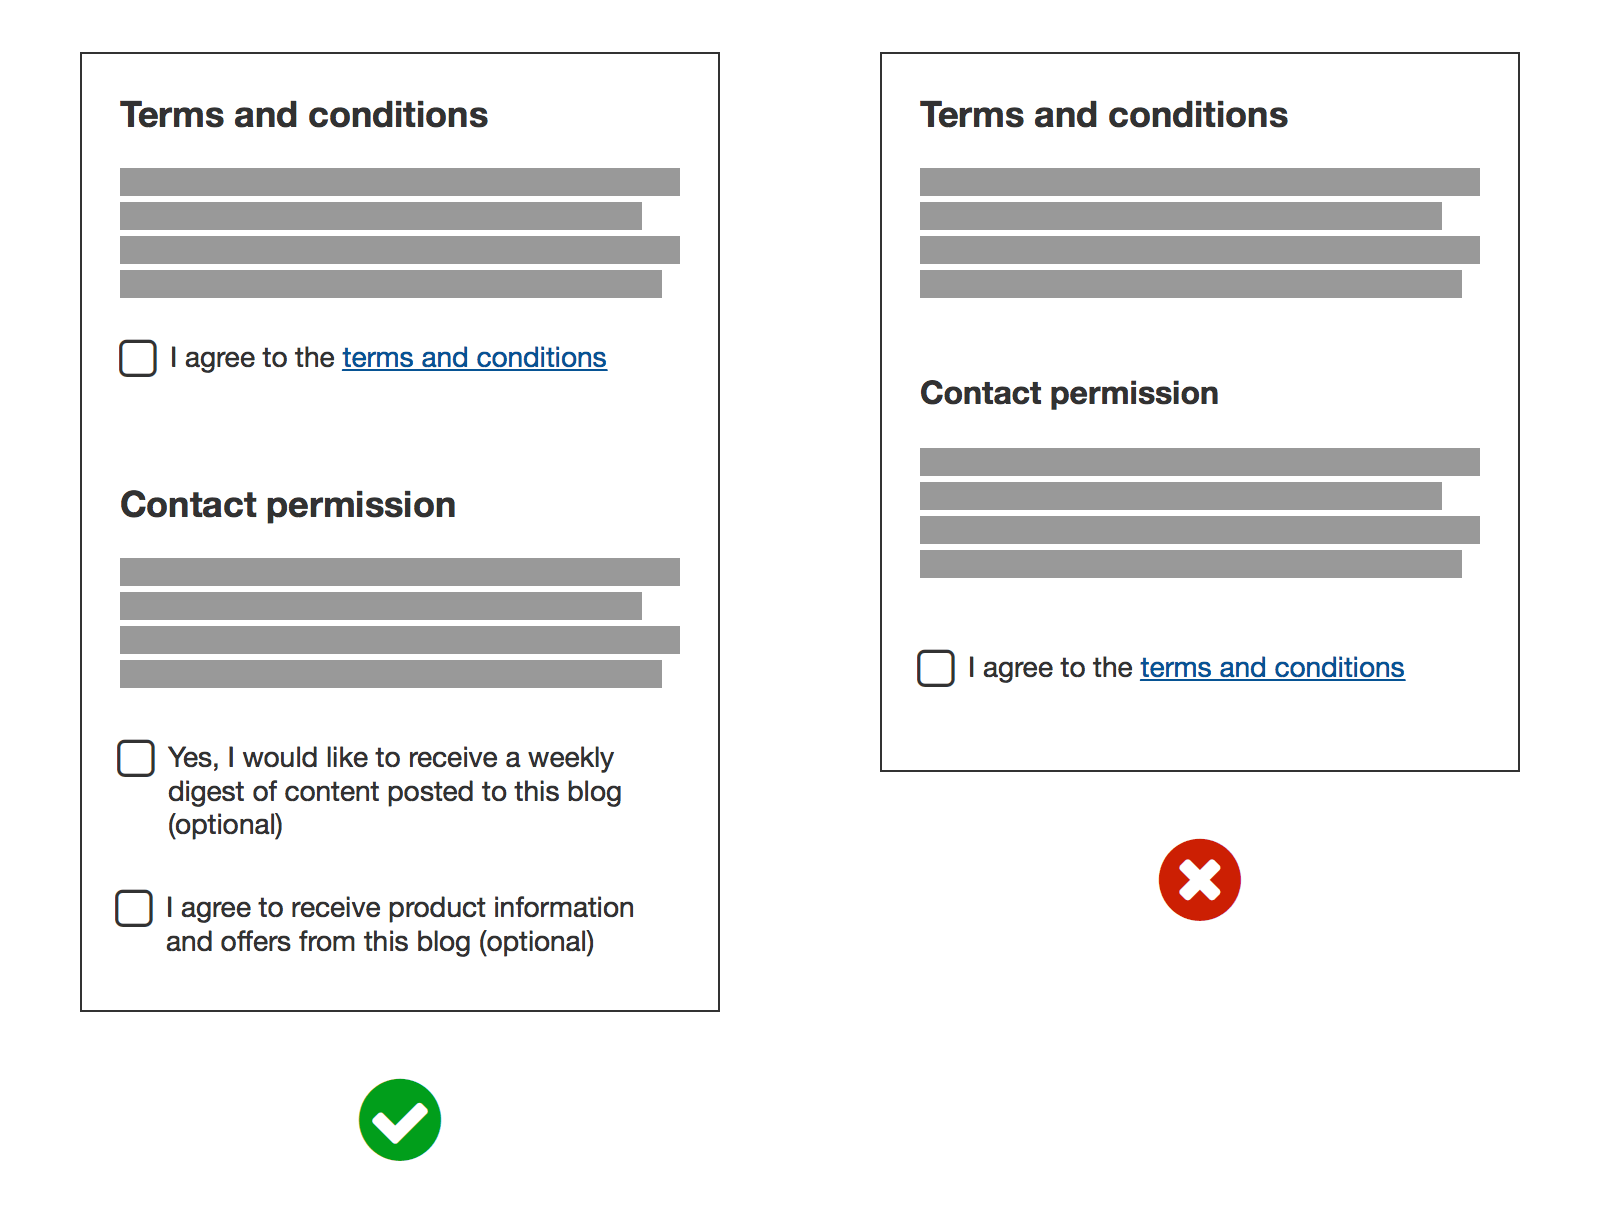 GDPR form - Separate consent requests from terms and conditions